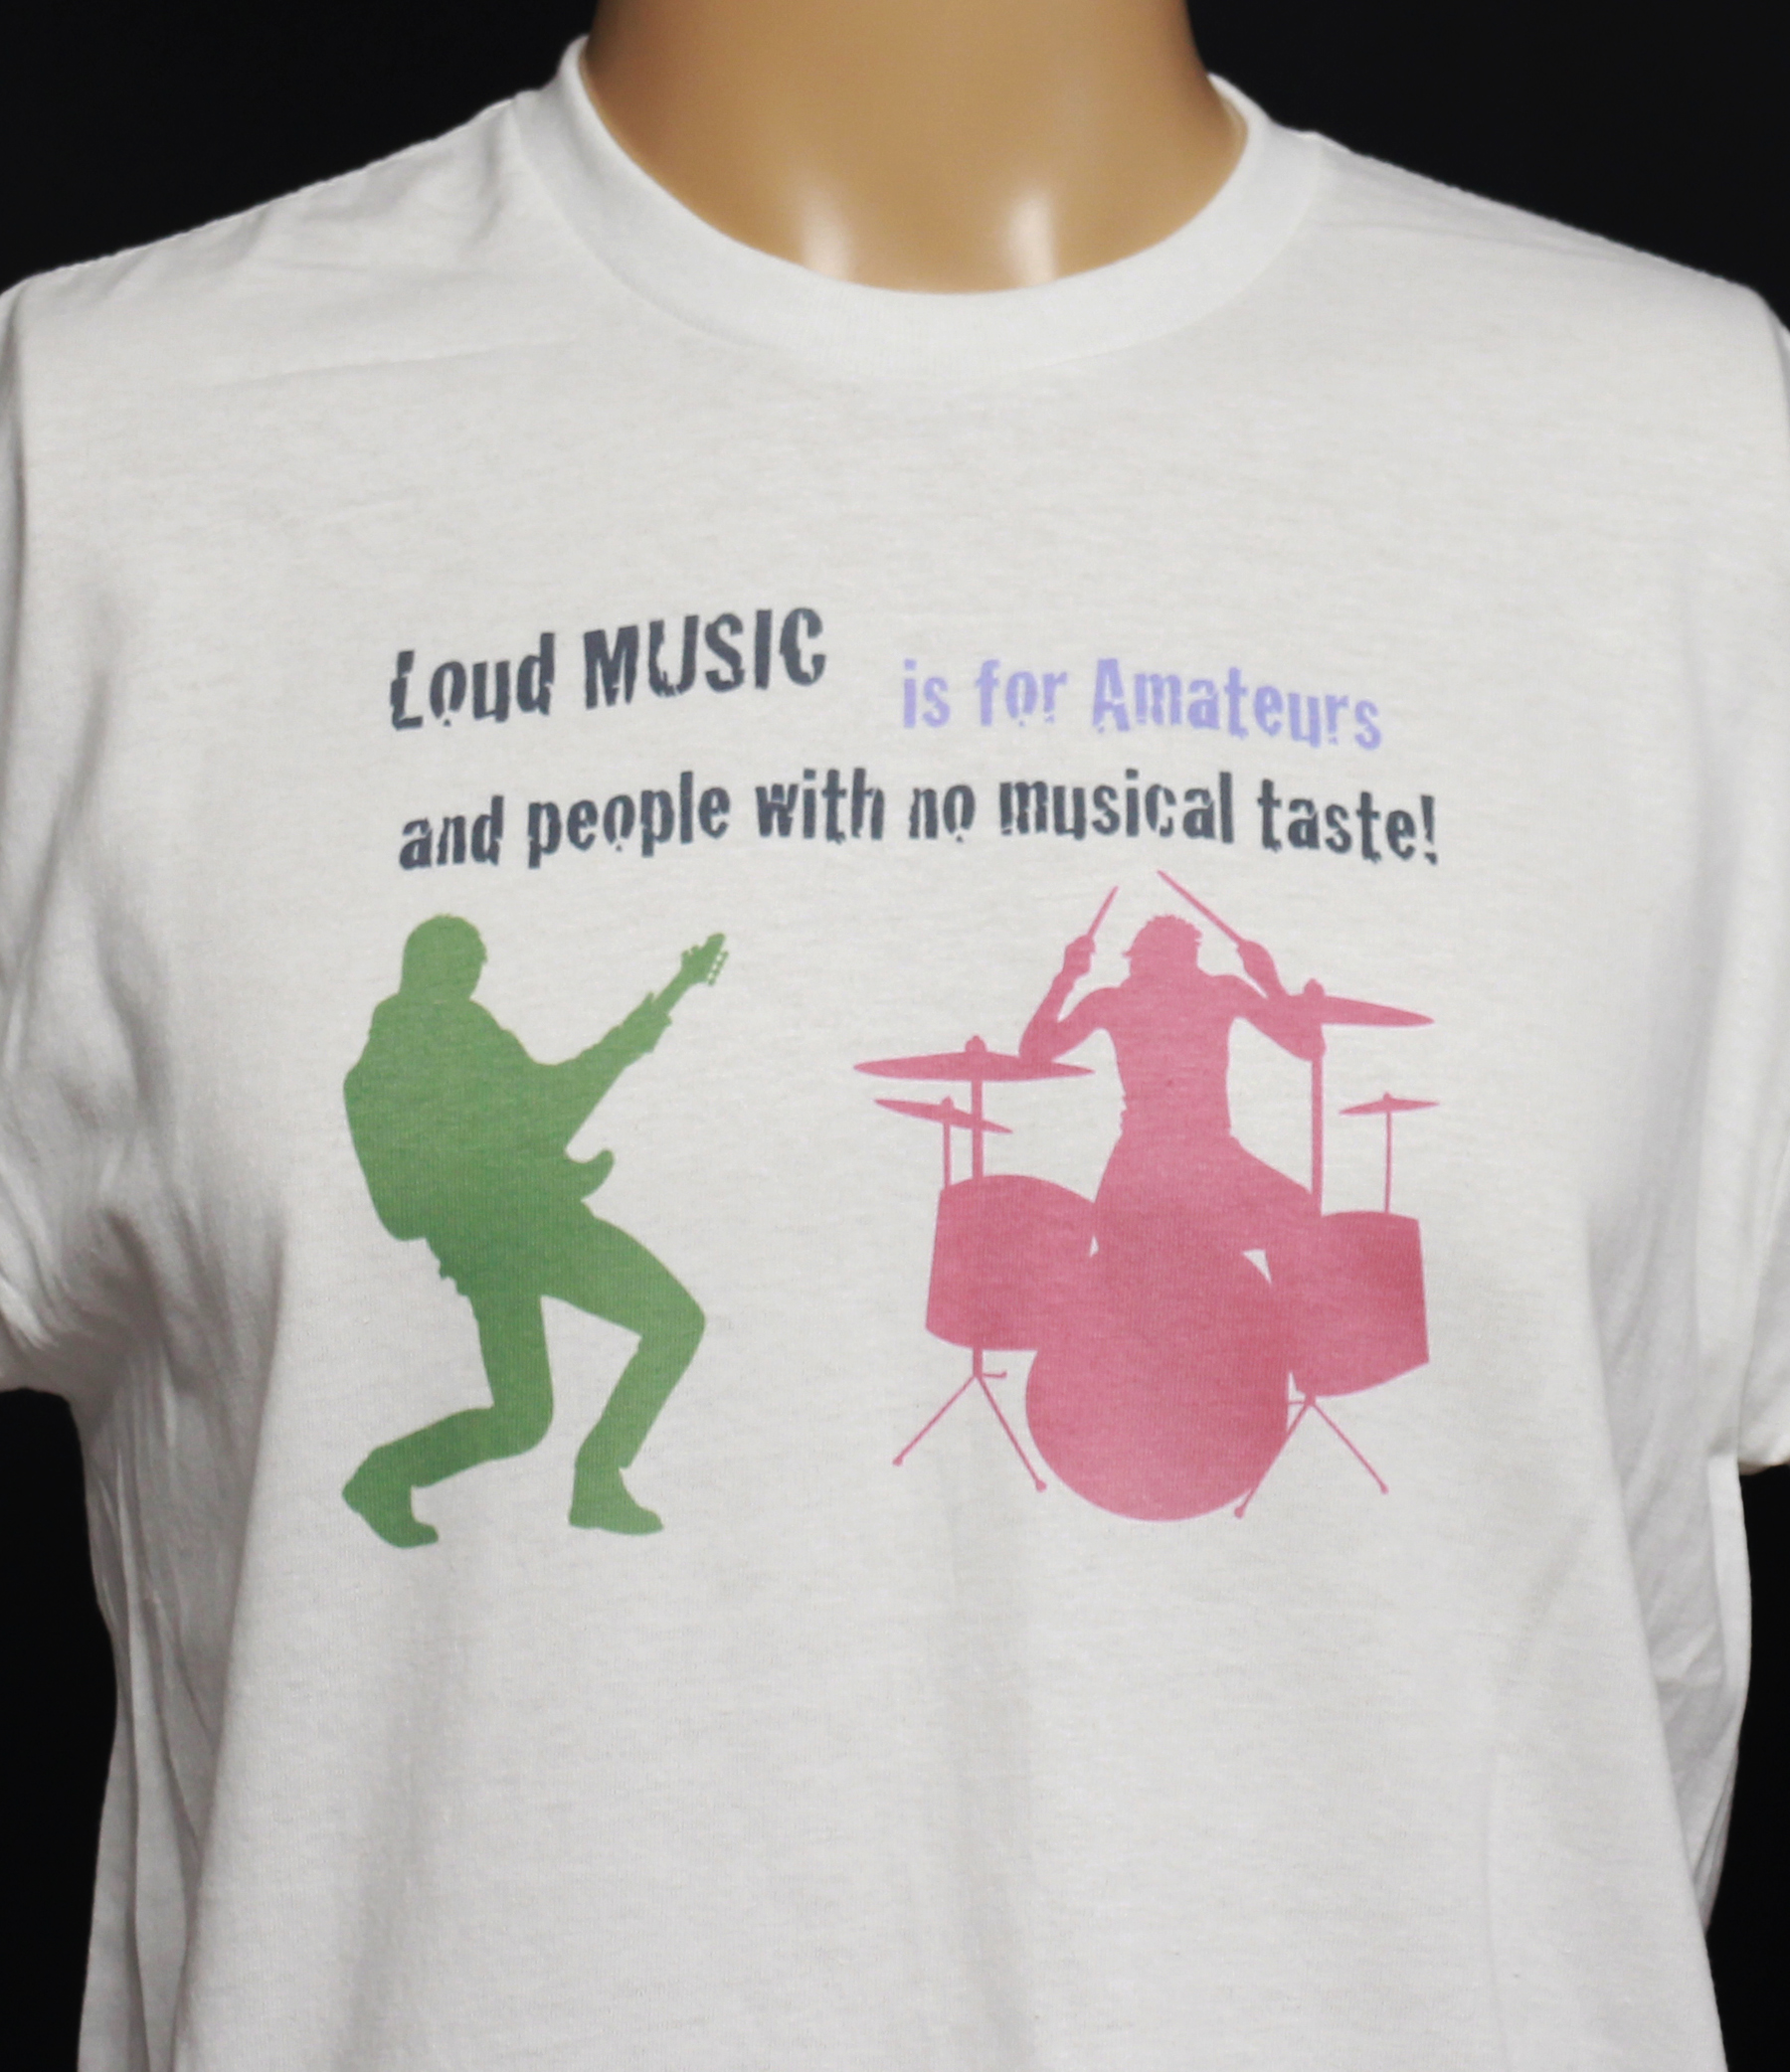 Loud MUSOC is for Amateurs and people woth no musical taste!